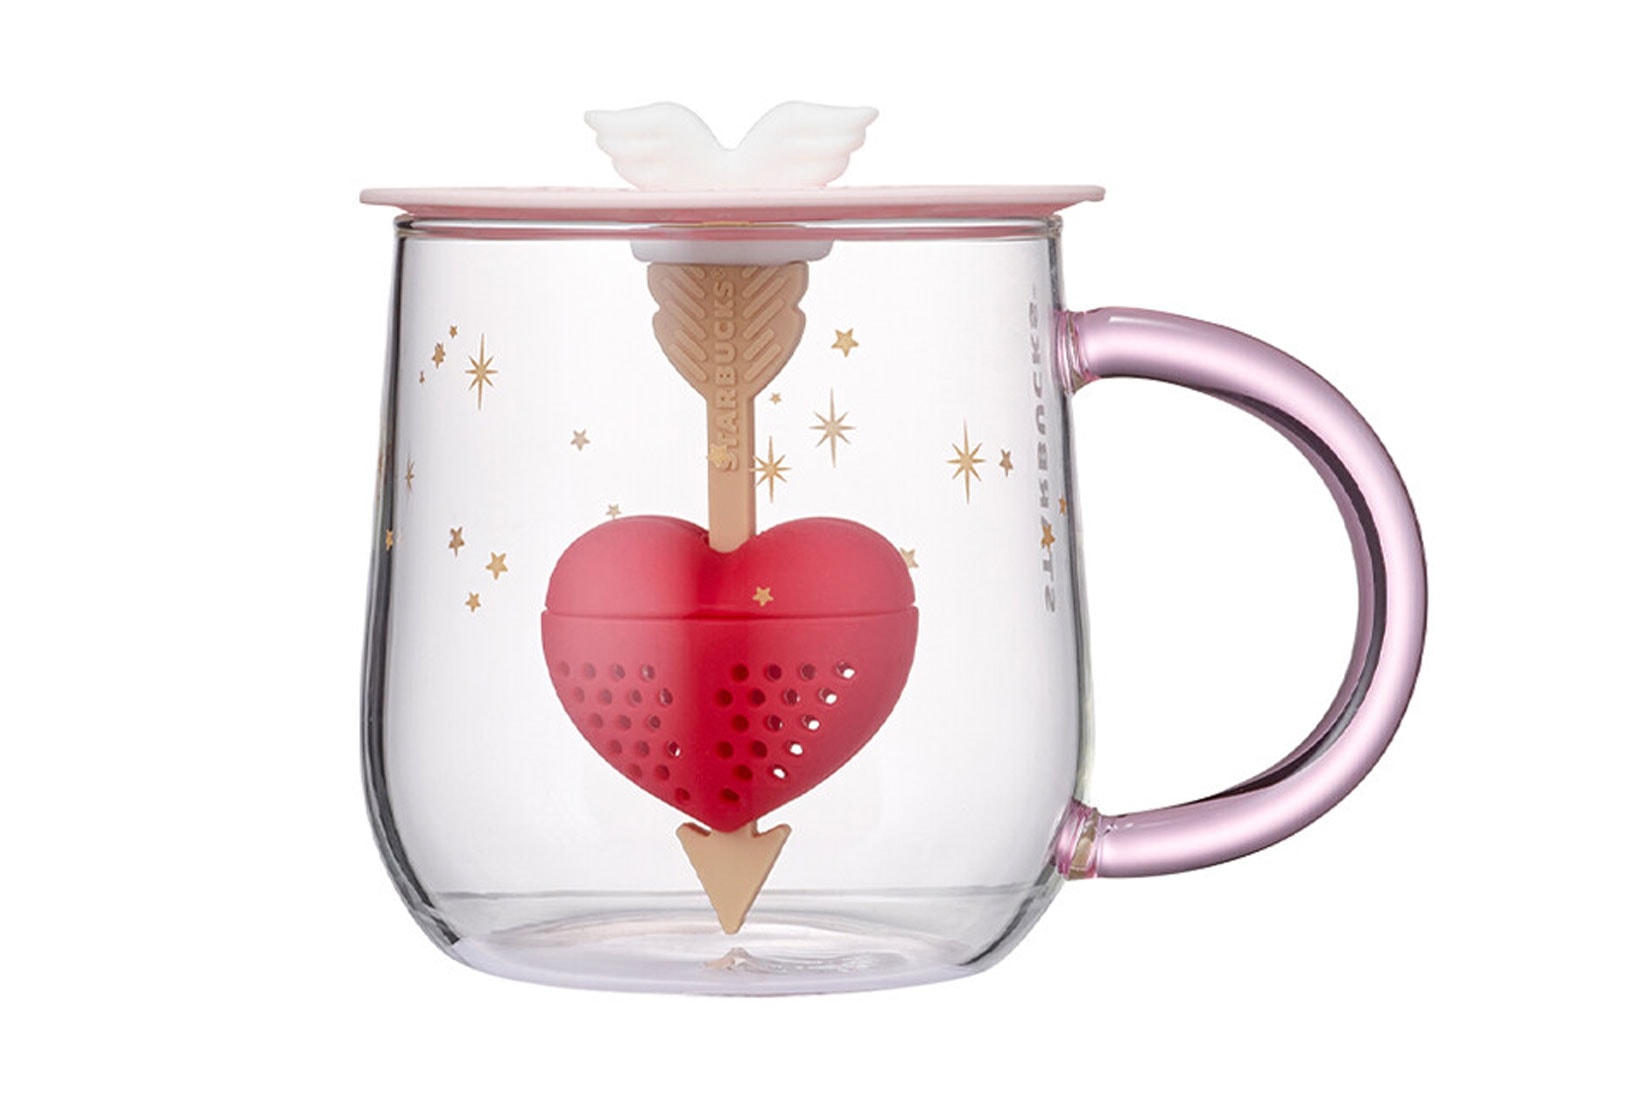 starbucks korea valentines day merch collection color changing tea infuser glass heart